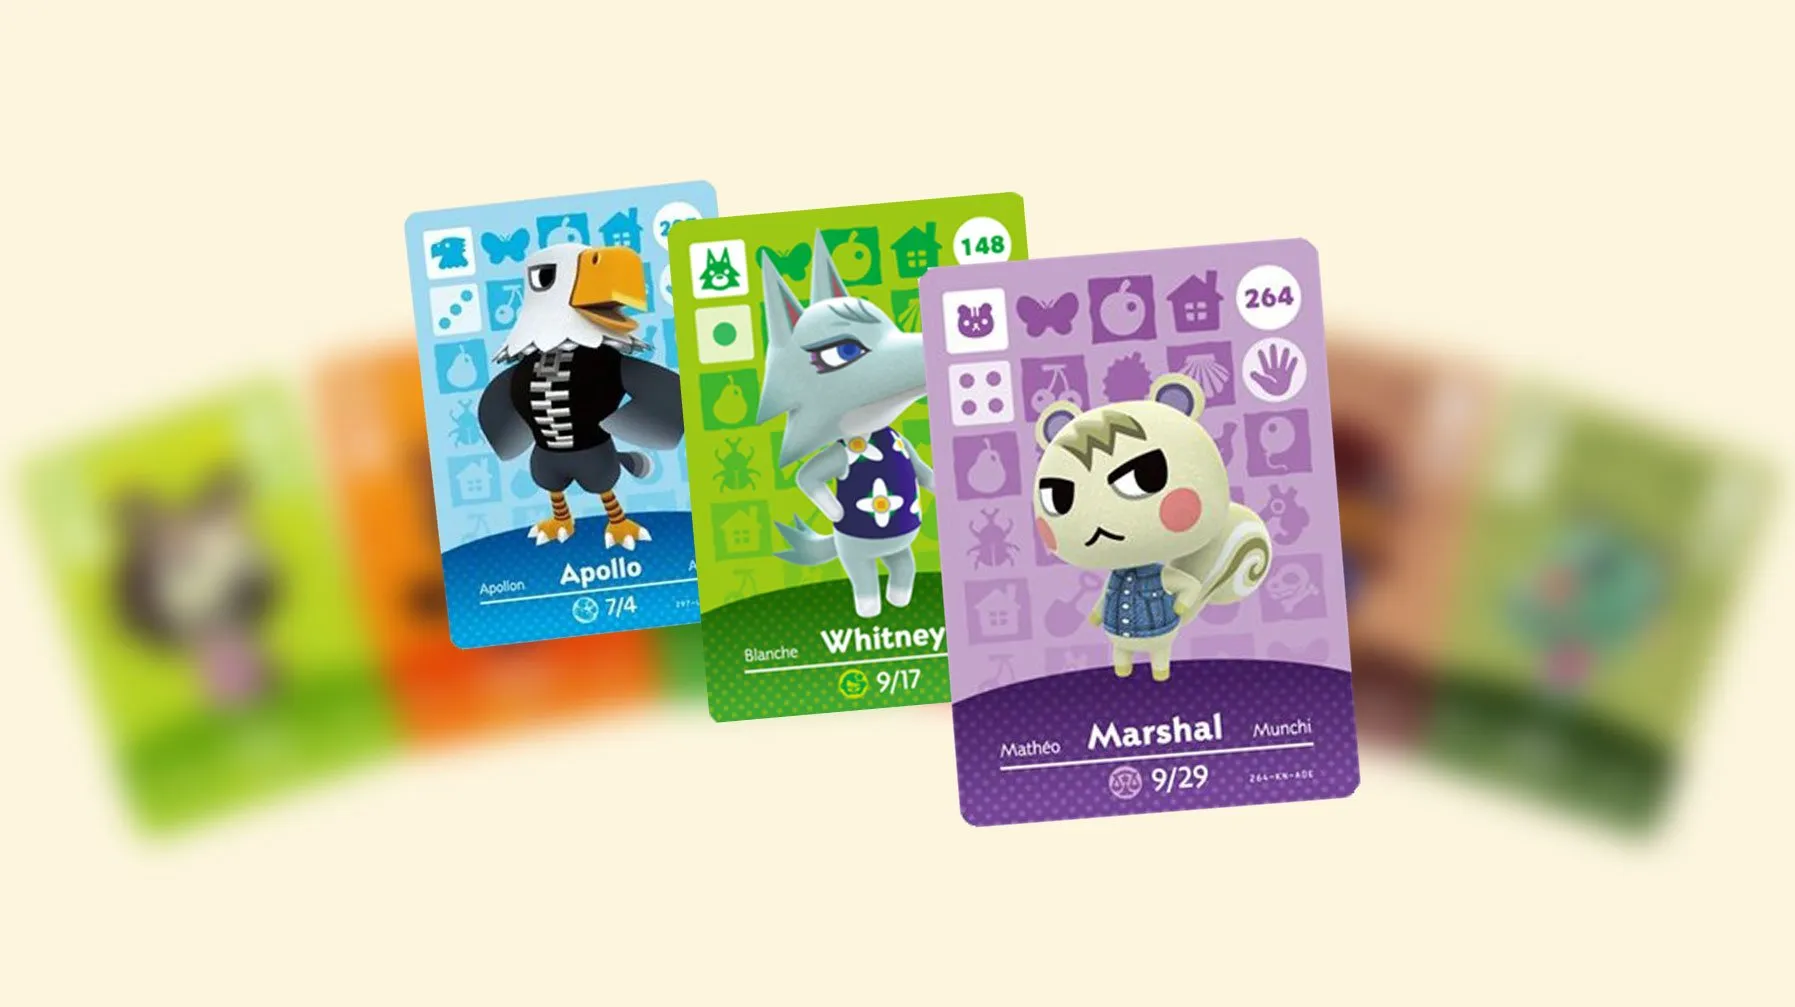 People On Ebay Are Asking Insane Prices For These Animal Crossing Amiibo Cards Destructoid